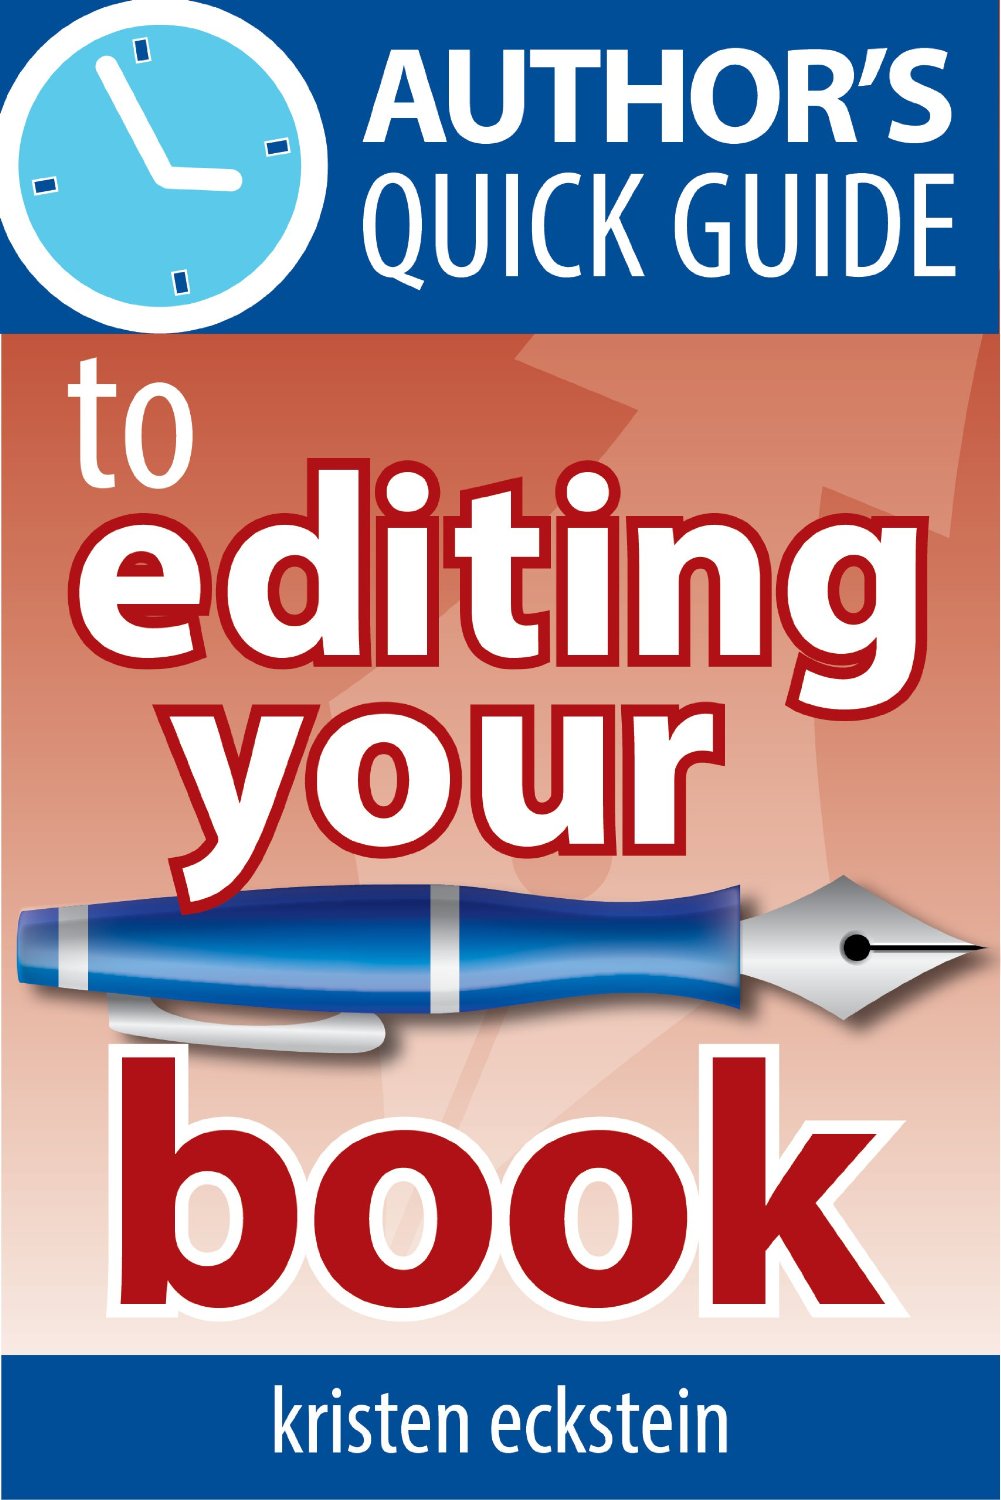 Author’s Quick Guide to Editing Your Book by Kristen Eckstein